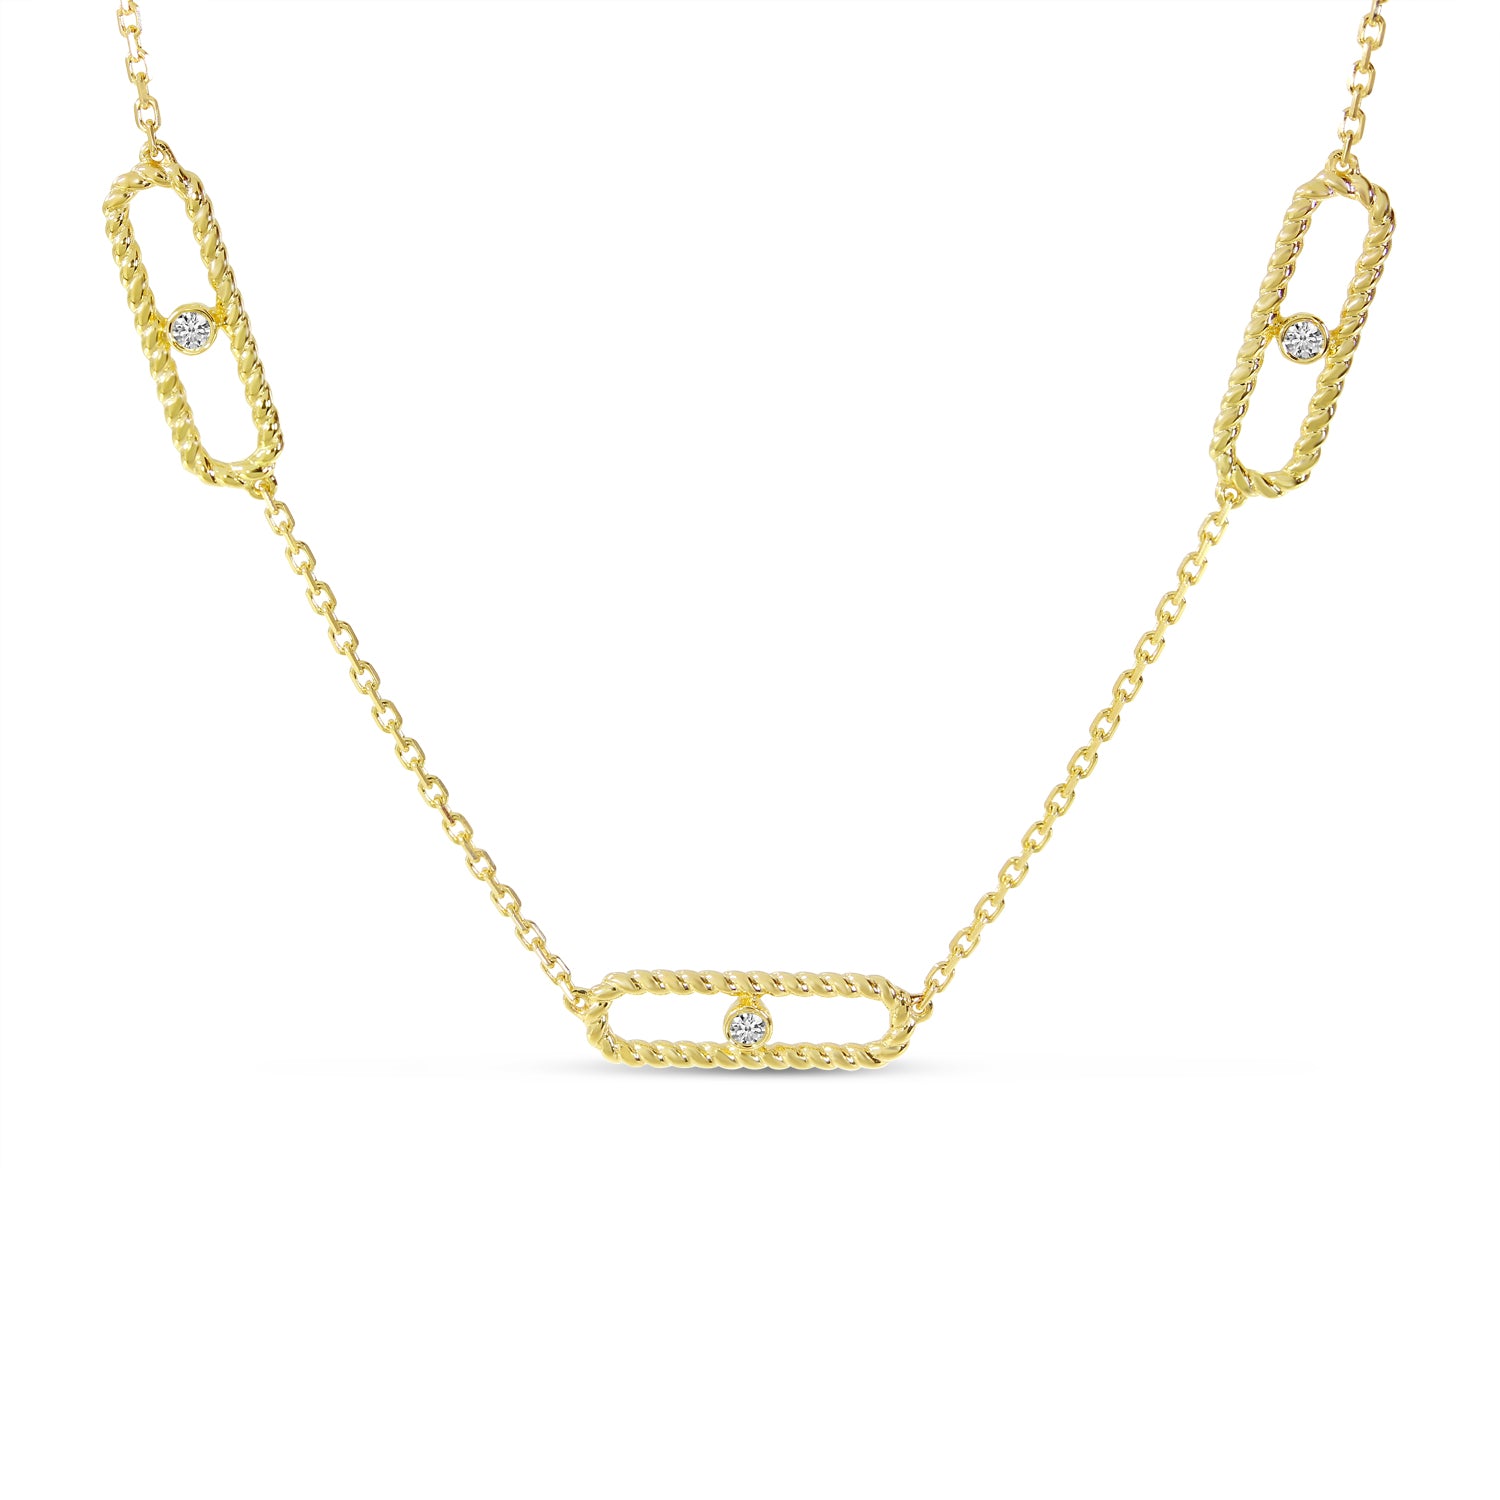 14K Yellow Gold 5-Station Diamond Twist Paperclip Necklace P10888-18